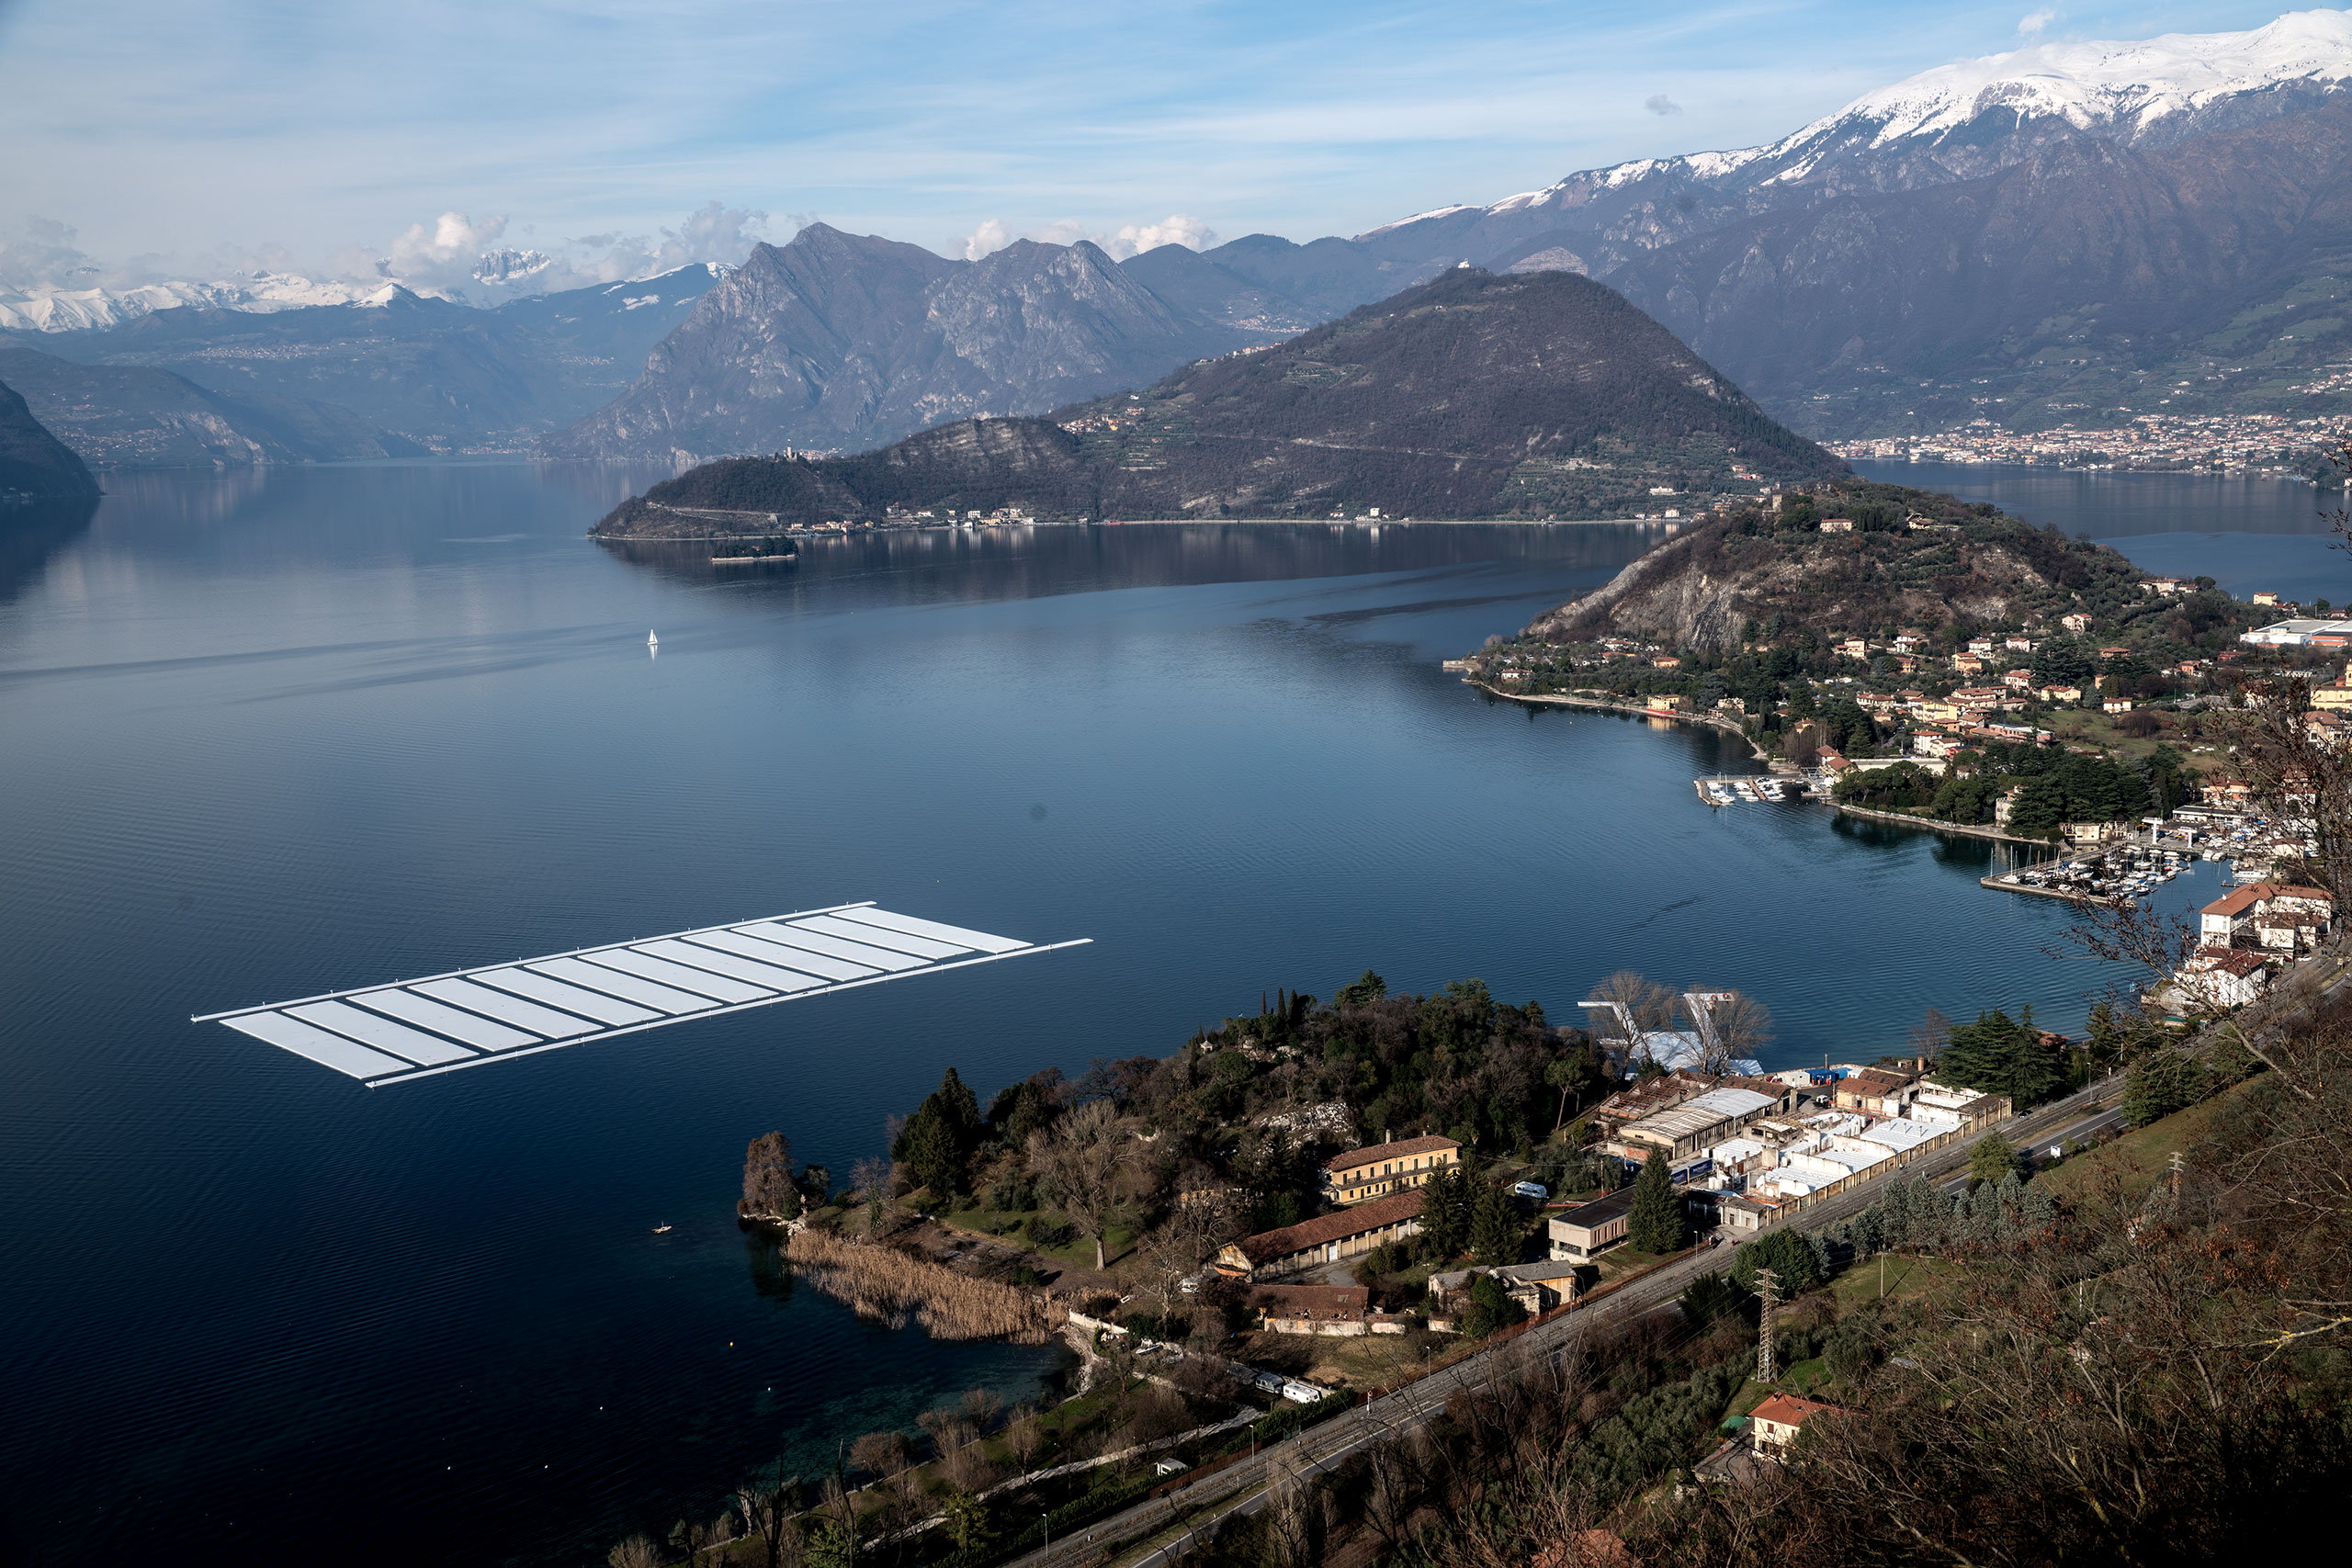 p4_christo_and_jean_claude_the_floating_piers_lake_iseo_italy_installation_yatzer